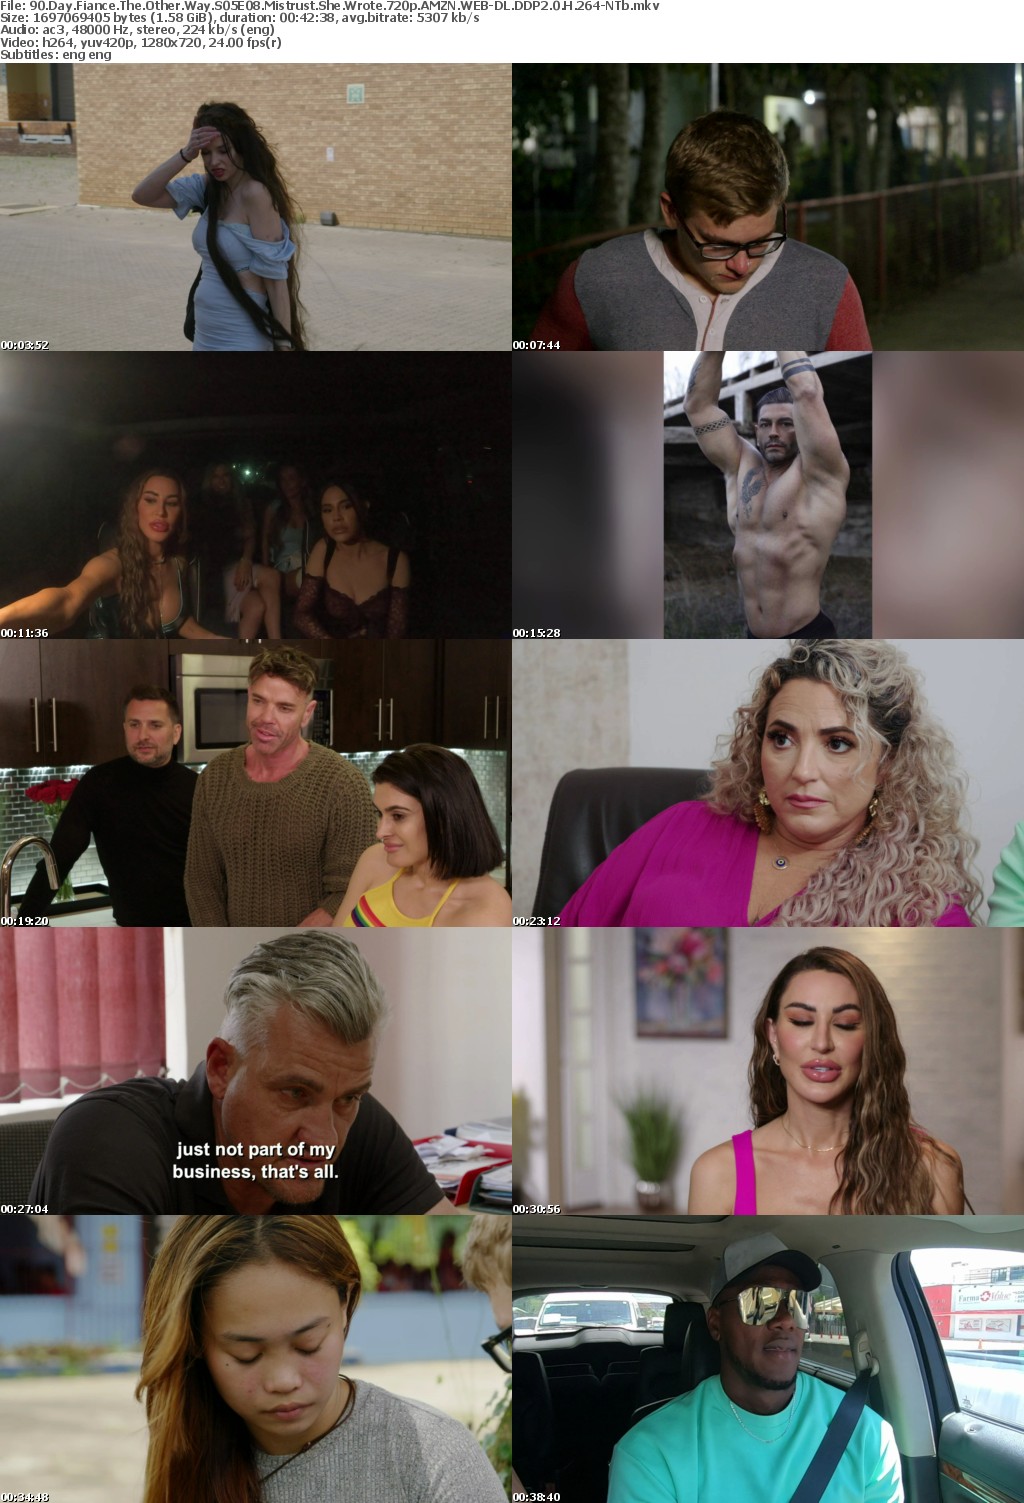 90 Day Fiance The Other Way S05E08 Mistrust She Wrote 720p AMZN WEB-DL DDP2 0 H 264-NTb